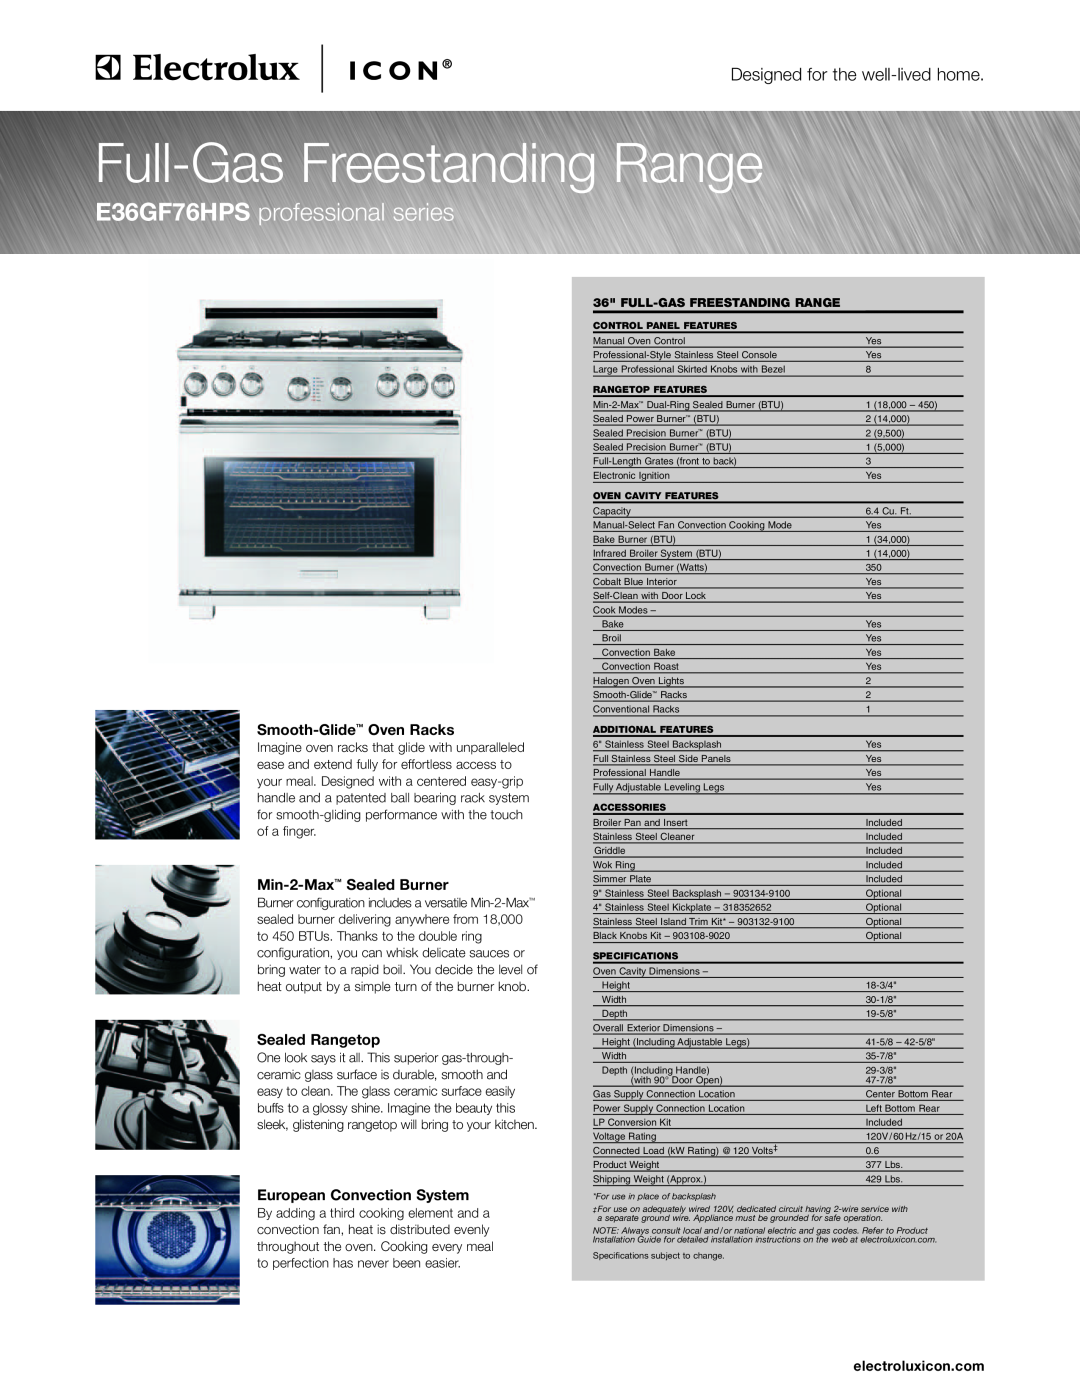 Electrolux E36GF76HPS specifications Smooth-Glide Oven Racks, Min-2-Max Sealed Burner, Sealed Rangetop, electroluxicon.com 